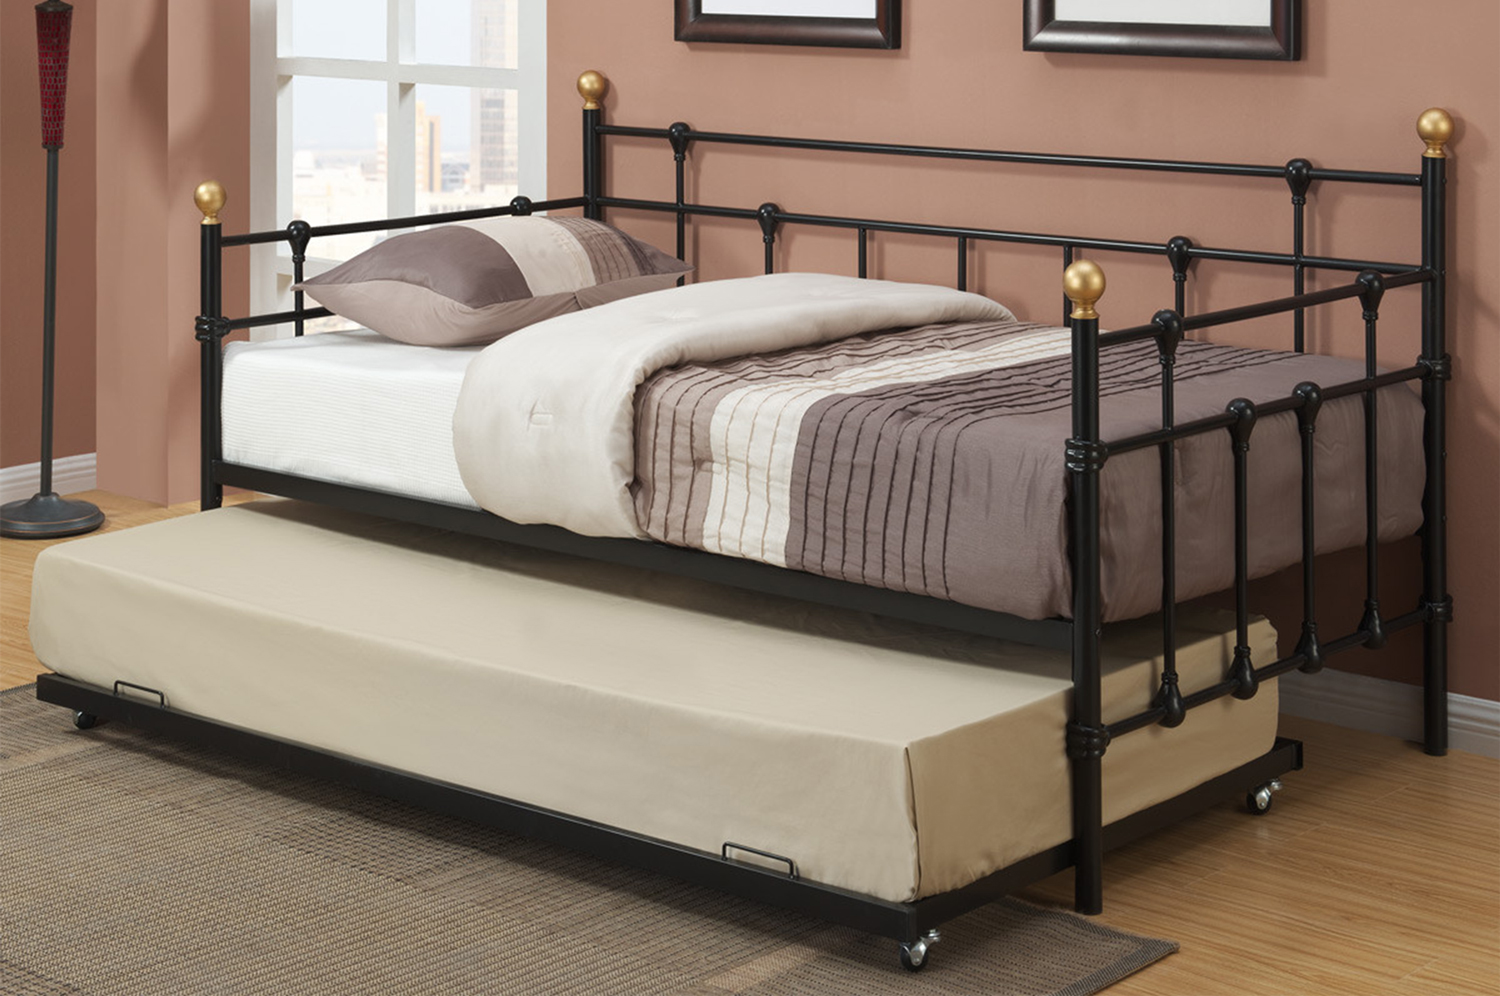 IF-311 - Black Metal Day Bed Frame with Bronze by International Furniture